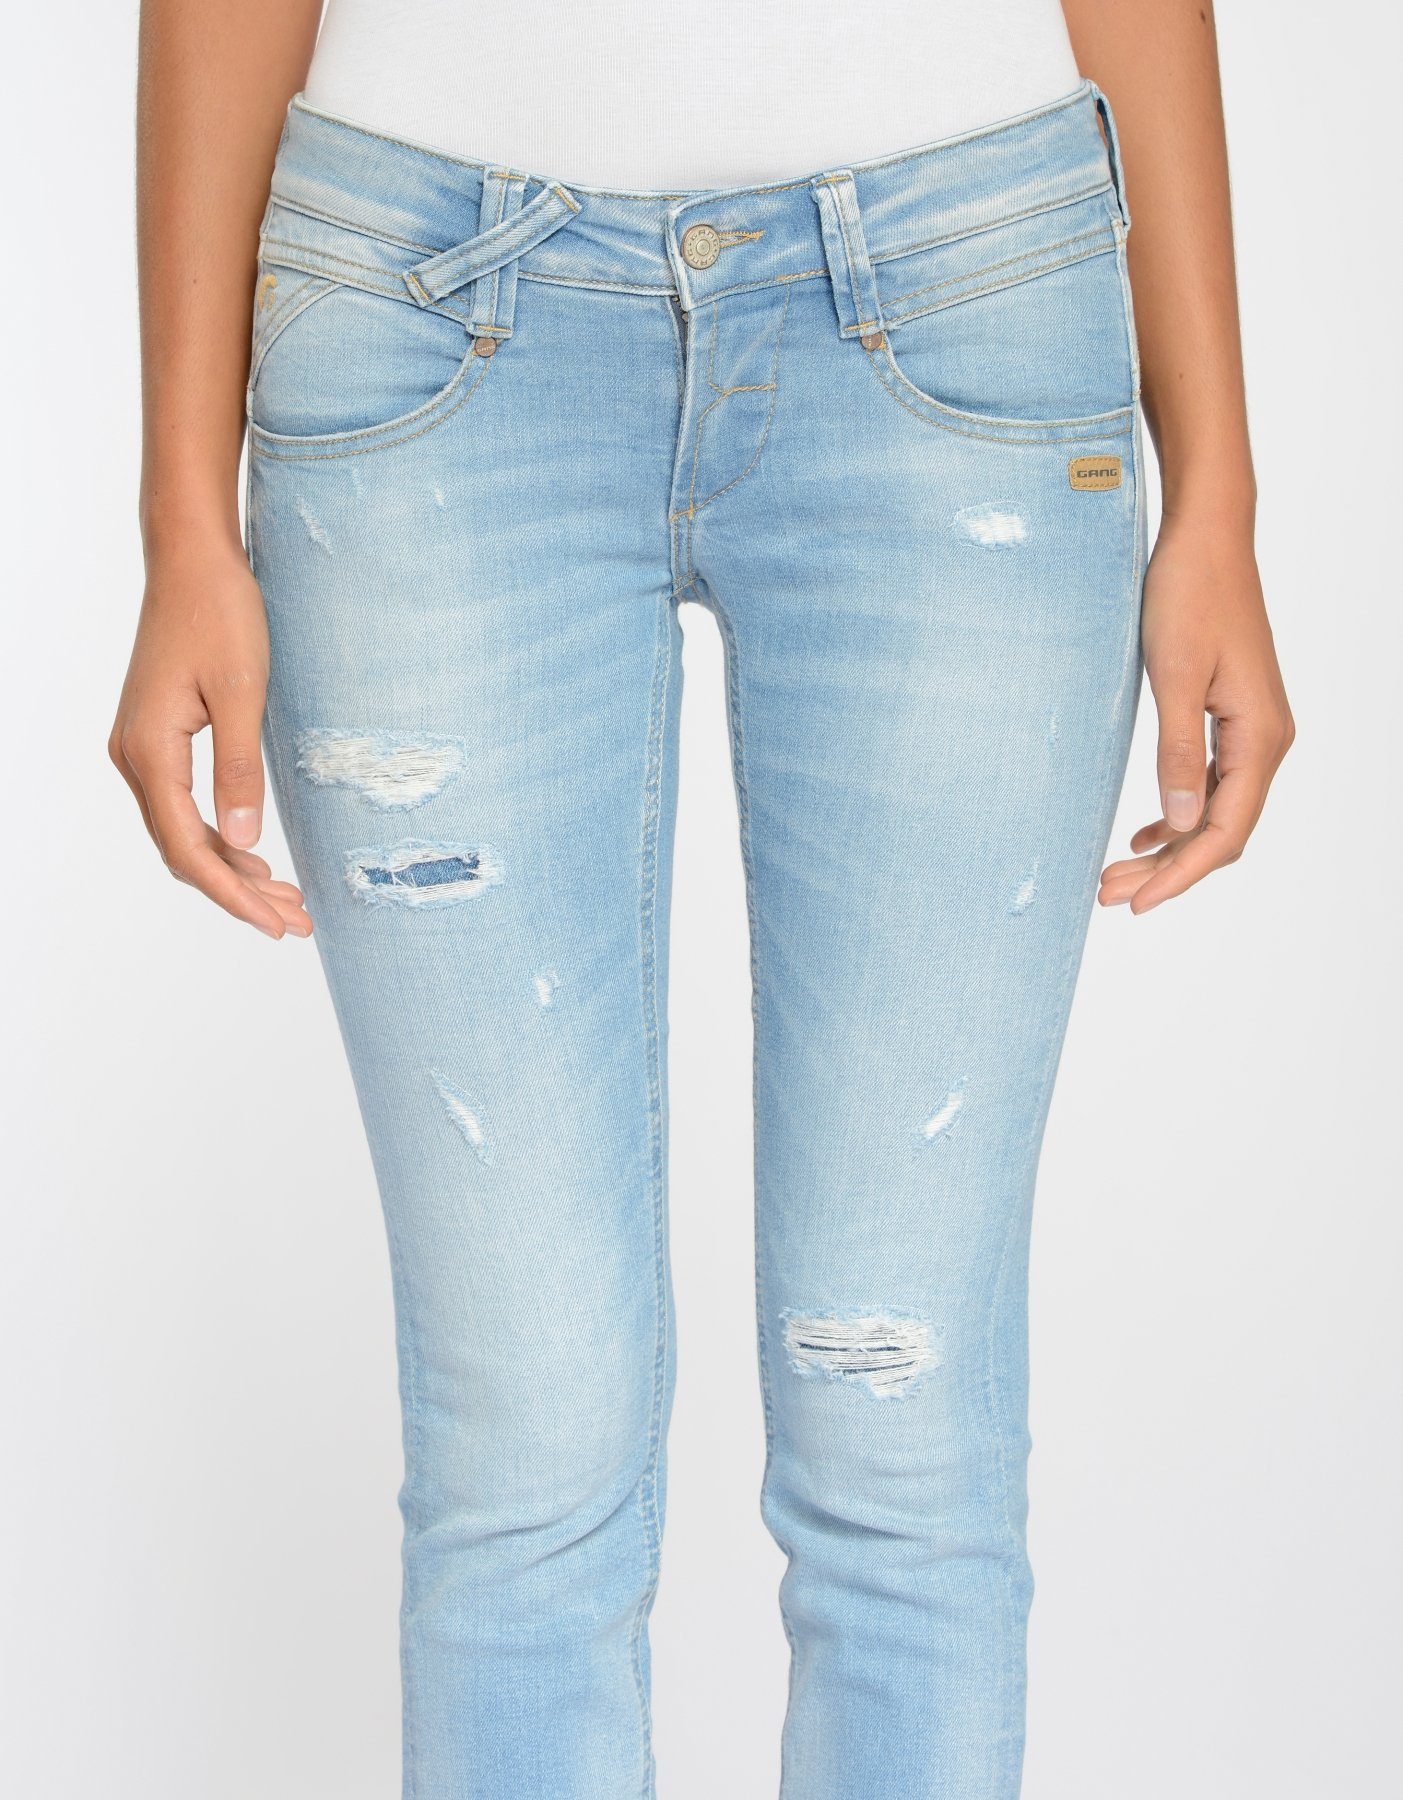 94NENA summerblue 5-Pocket-Jeans GANG - CROPPED used